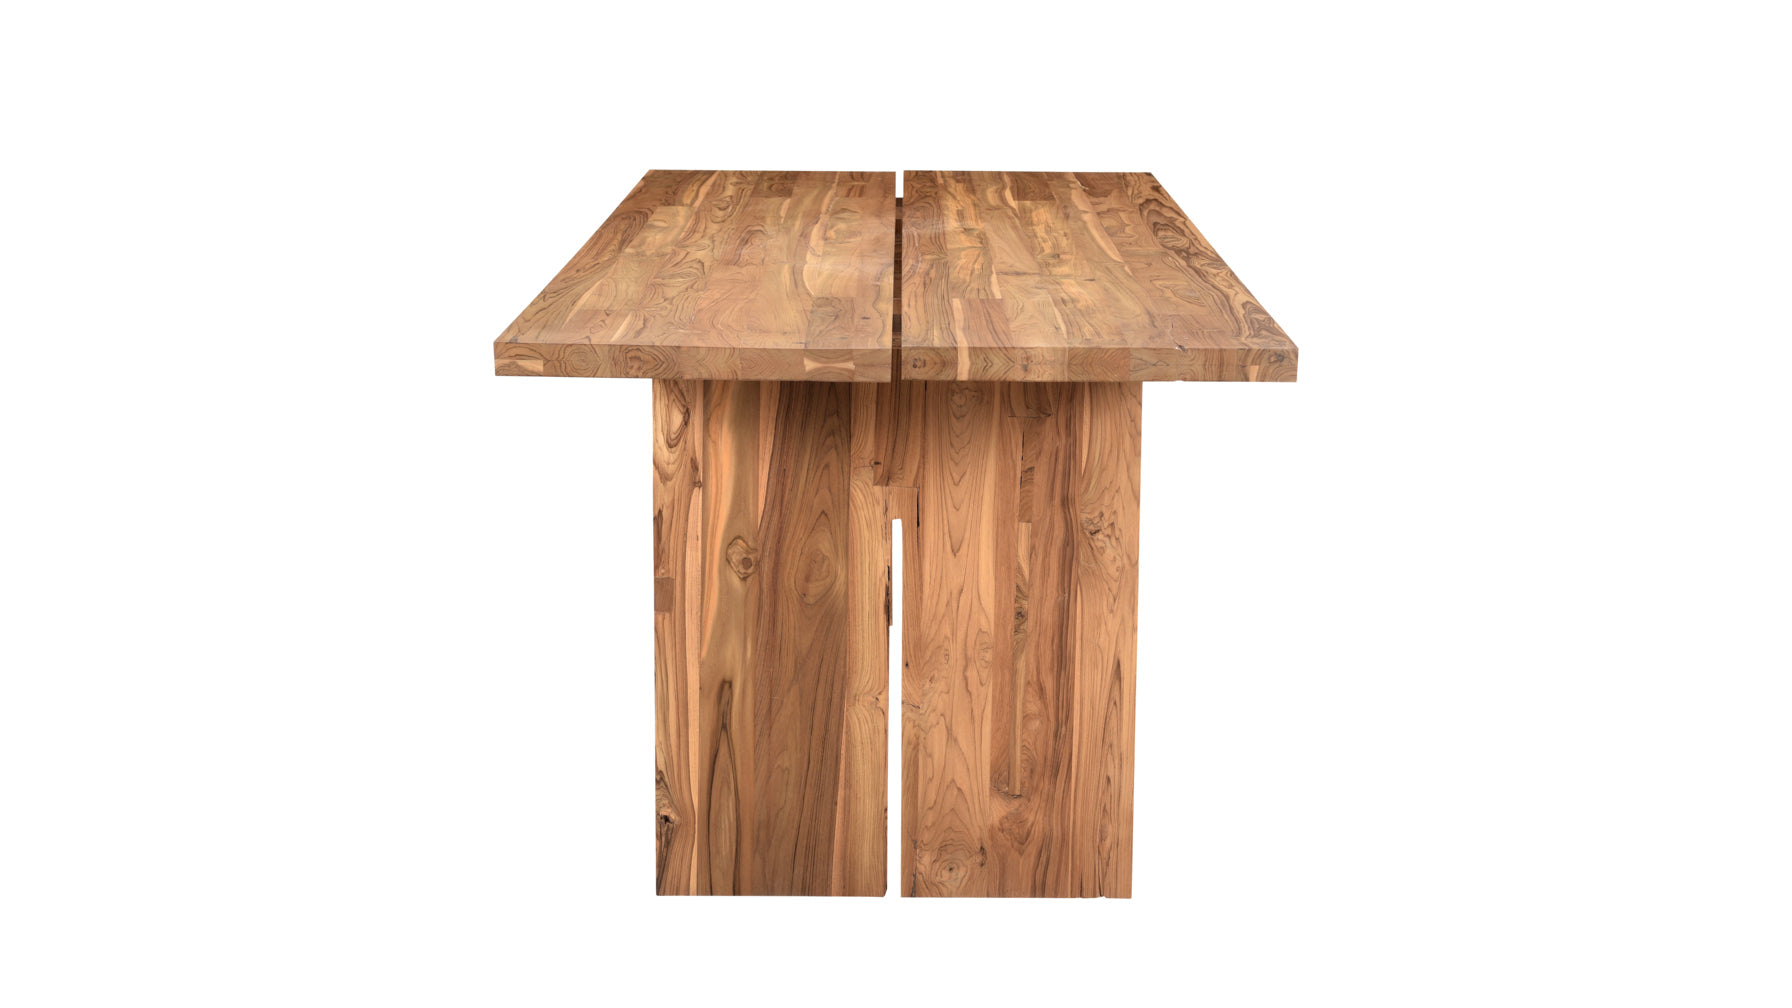 Plane Outdoor Dining Table, Seats 8-10, Teak - Image 3